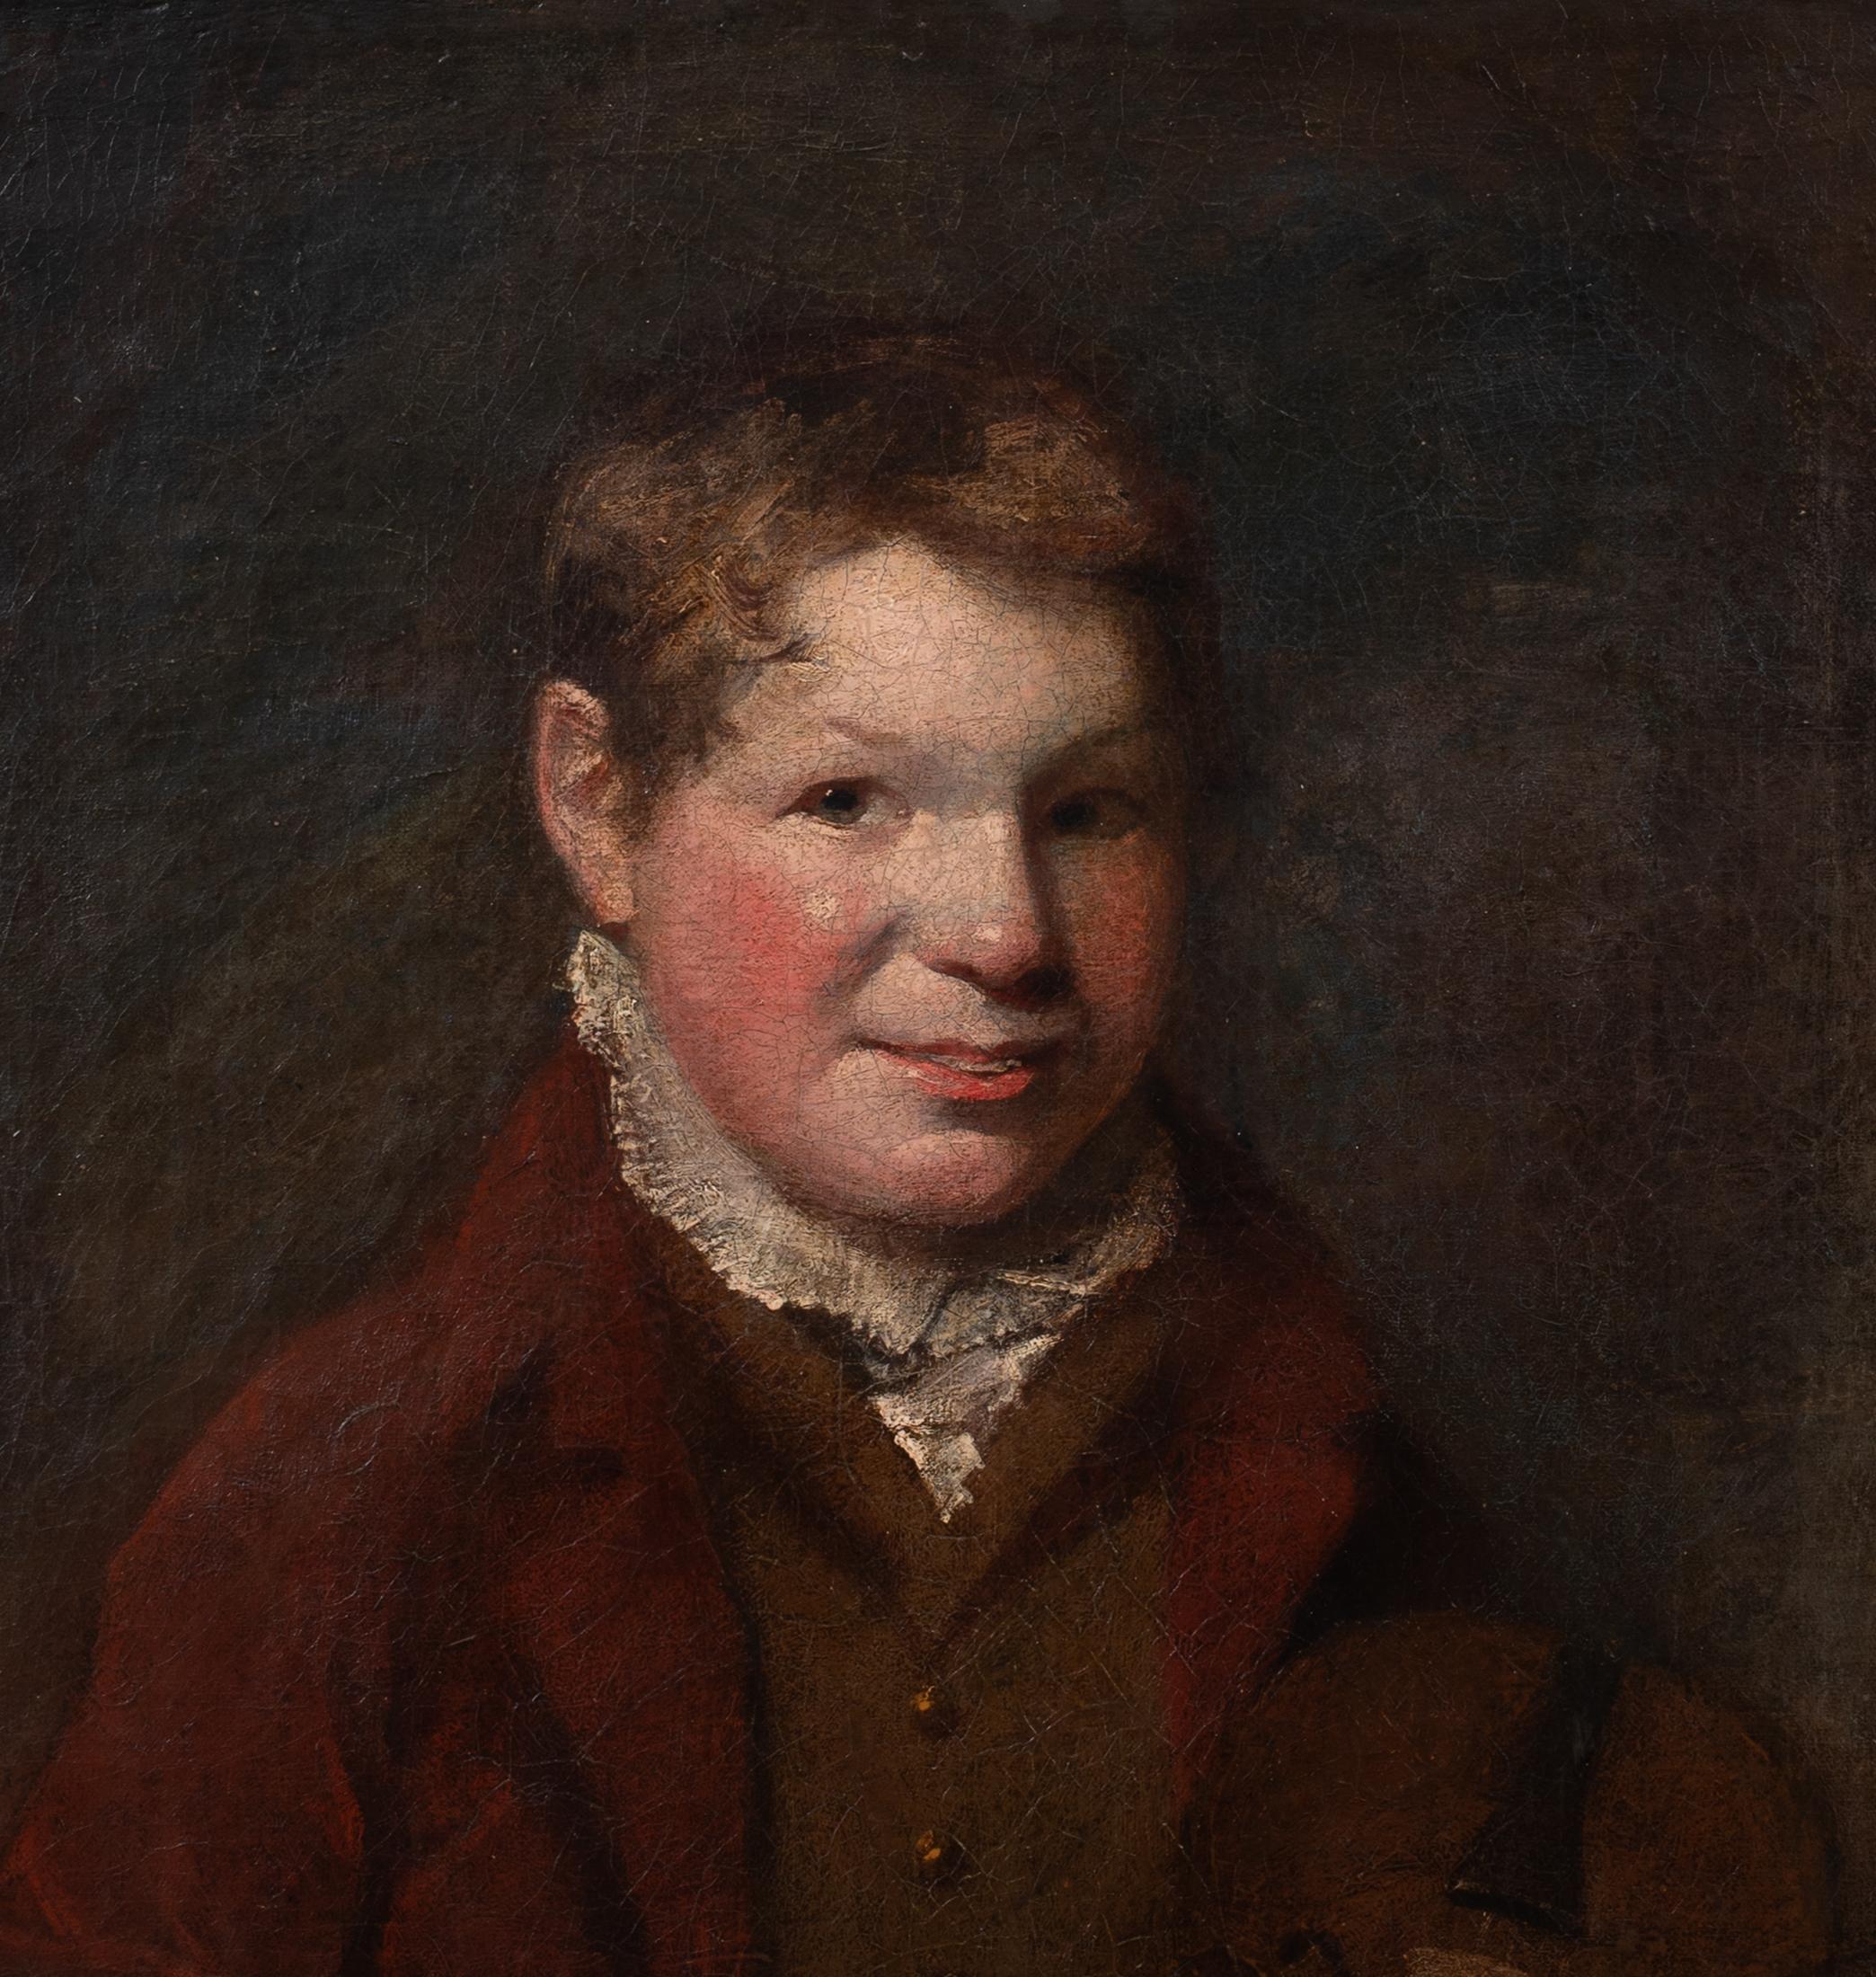 Portrait Of A Boy & Fiddle, 19th century

Irish School

Large early 19th Century Irish School portrait of a young boy and fiddle wearing a red jacket and brown waistcoat, oil on canvas. Excellent quality and condition interior portrait of the young